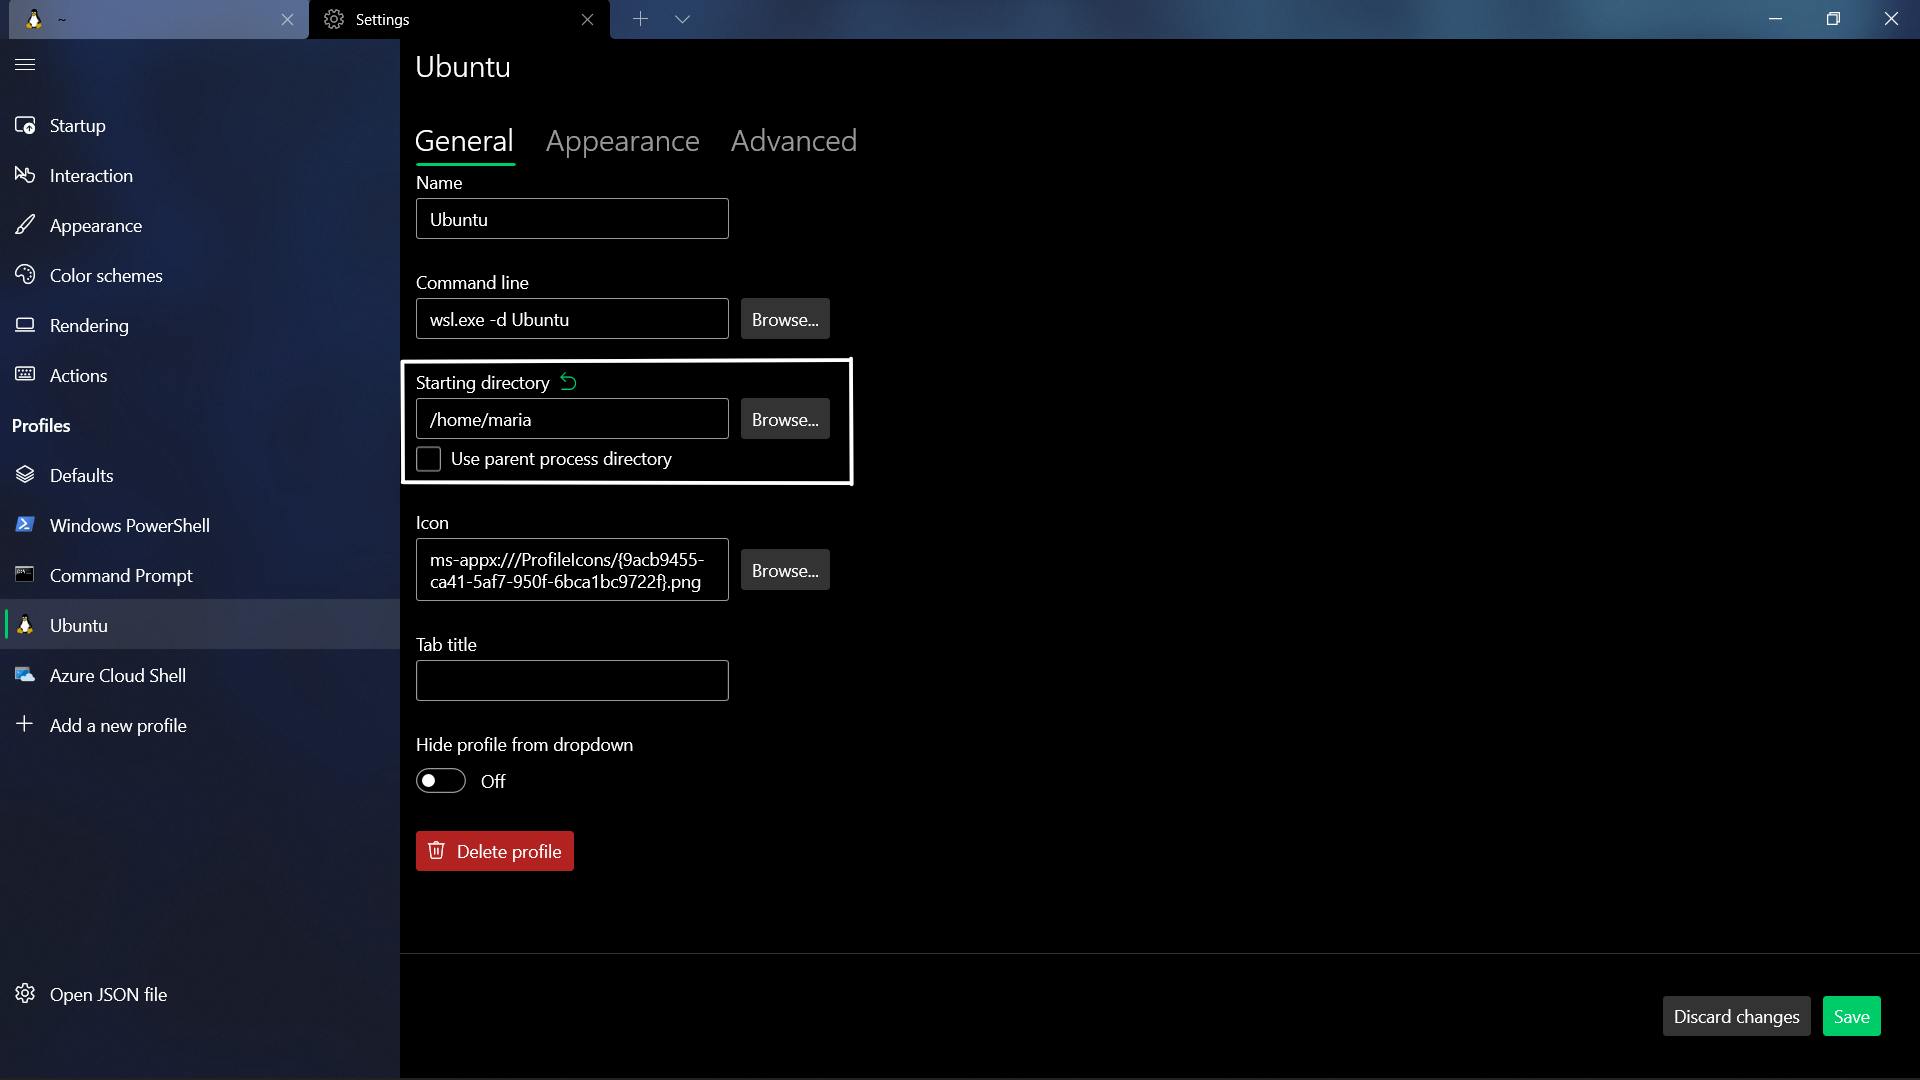 Image shows the Profile Settings for the terminal